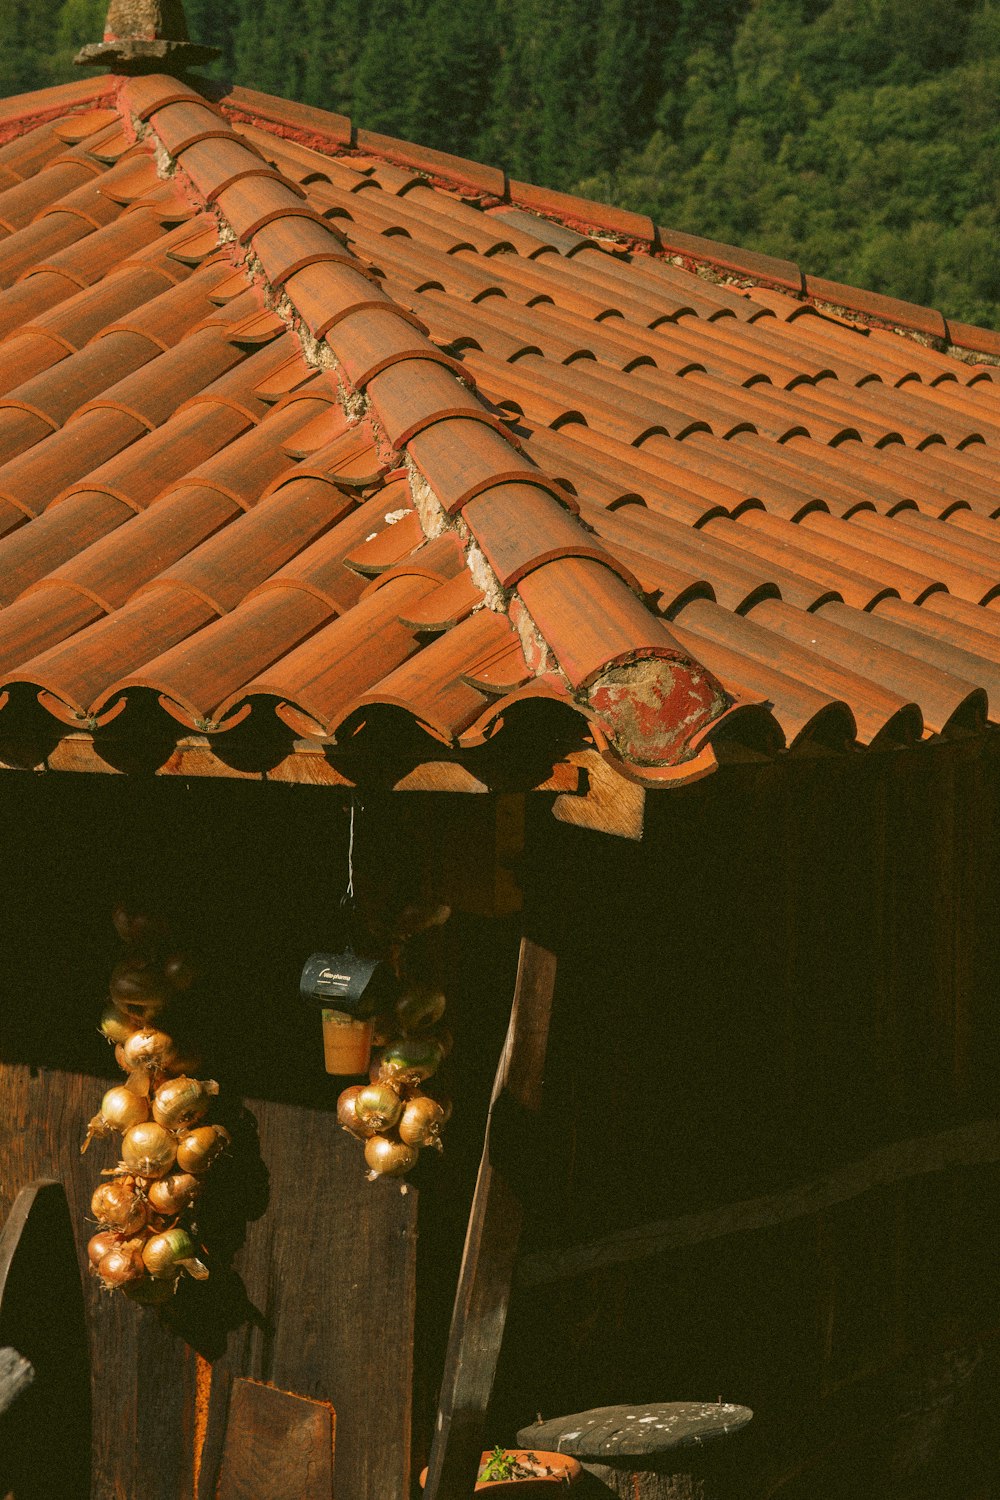 the roof of a building with pots of food hanging from it